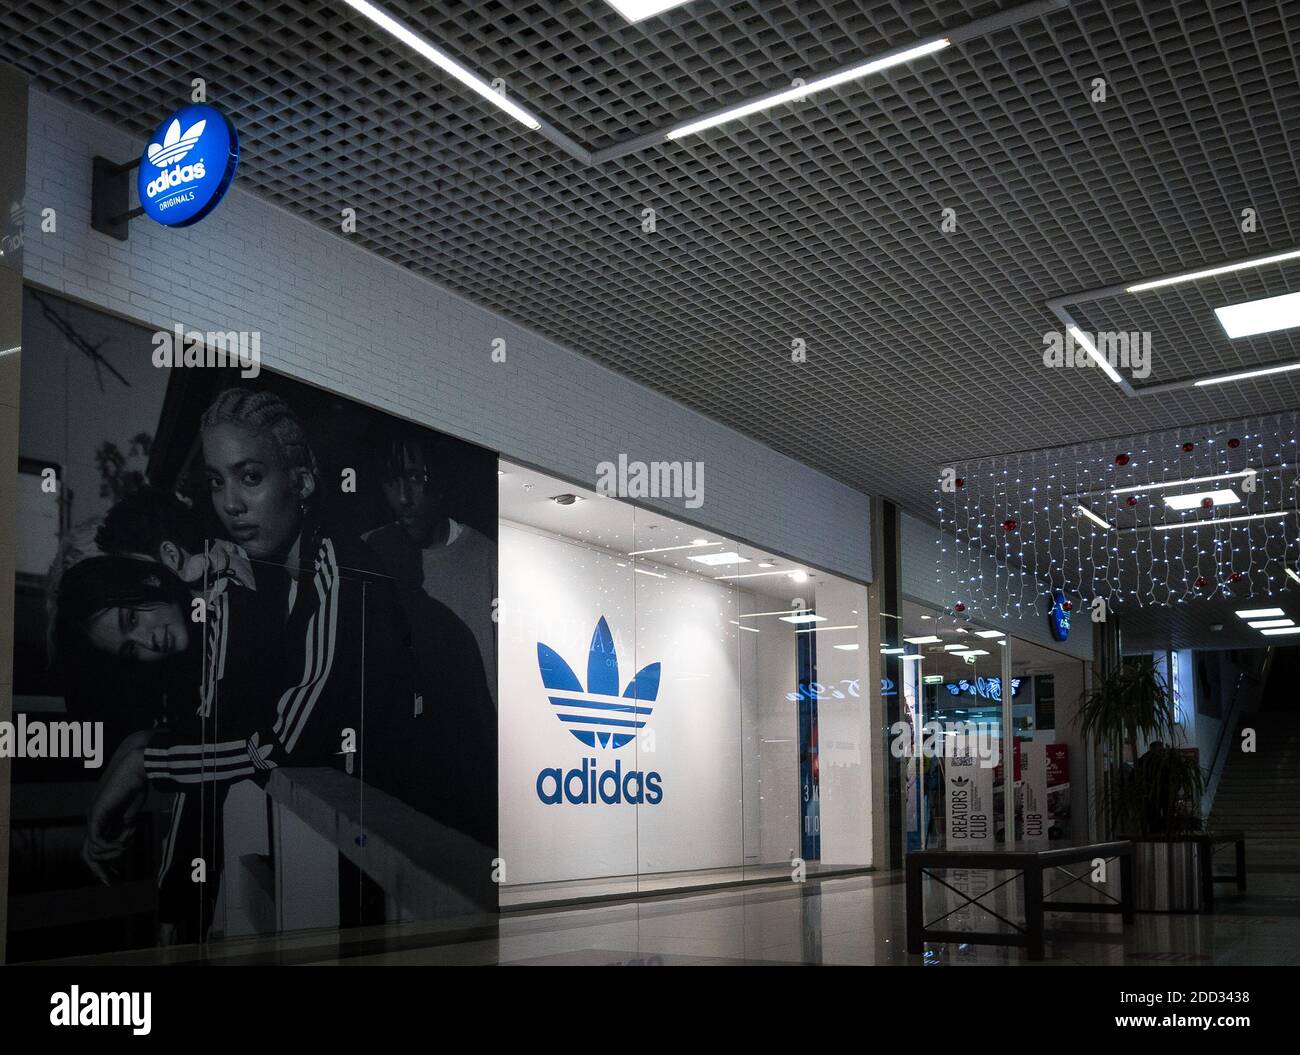 Adidas Store Interior High Resolution Stock Photography and Images - Alamy